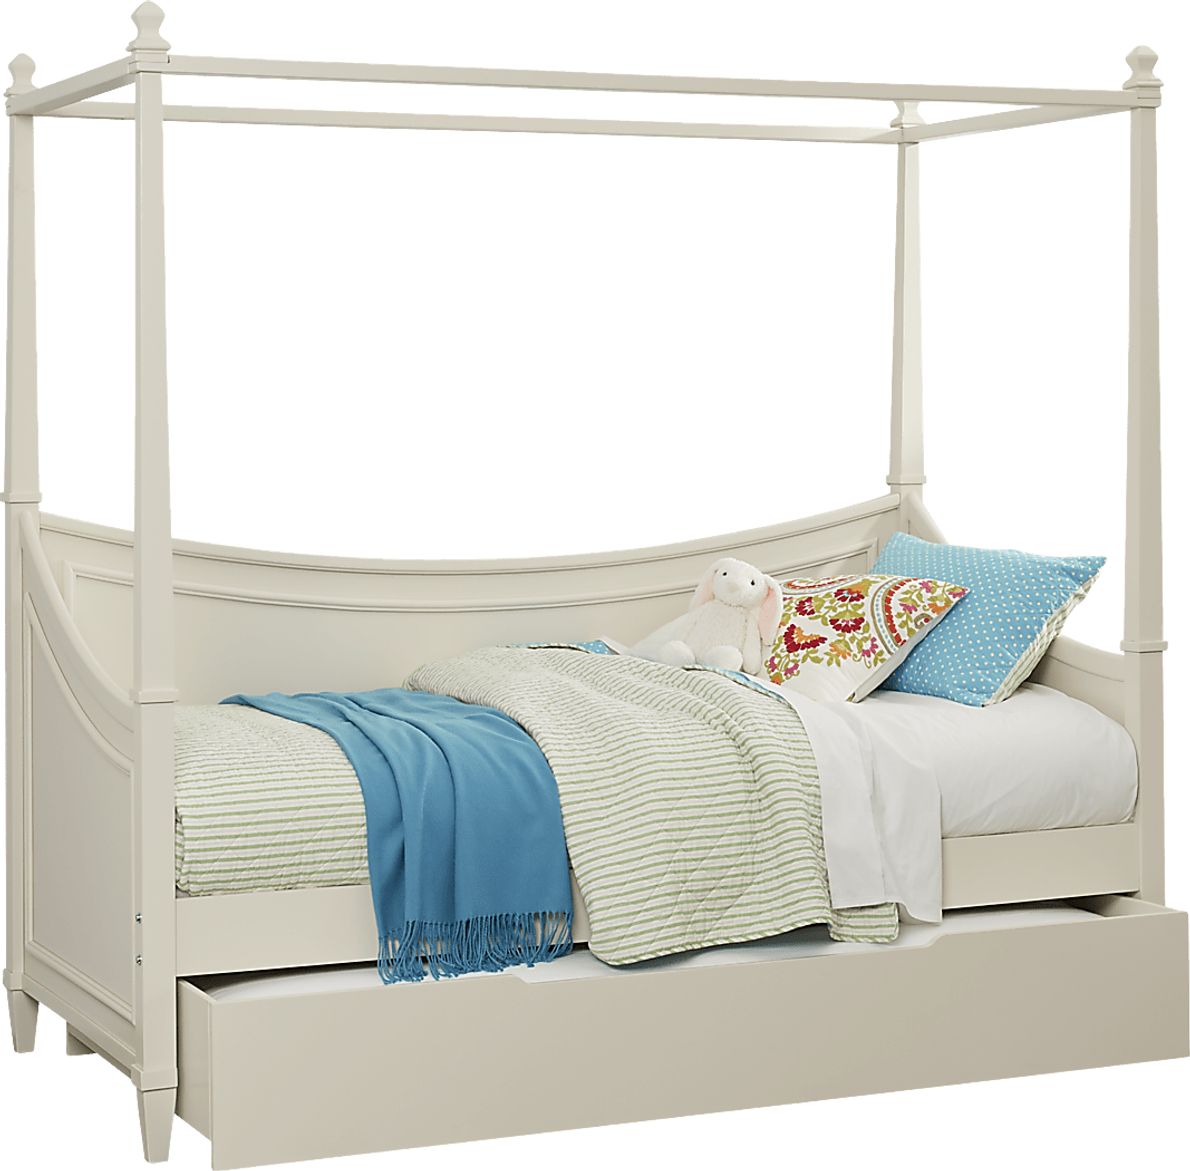 Kids Jaclyn Place Ivory Twin Canopy Daybed